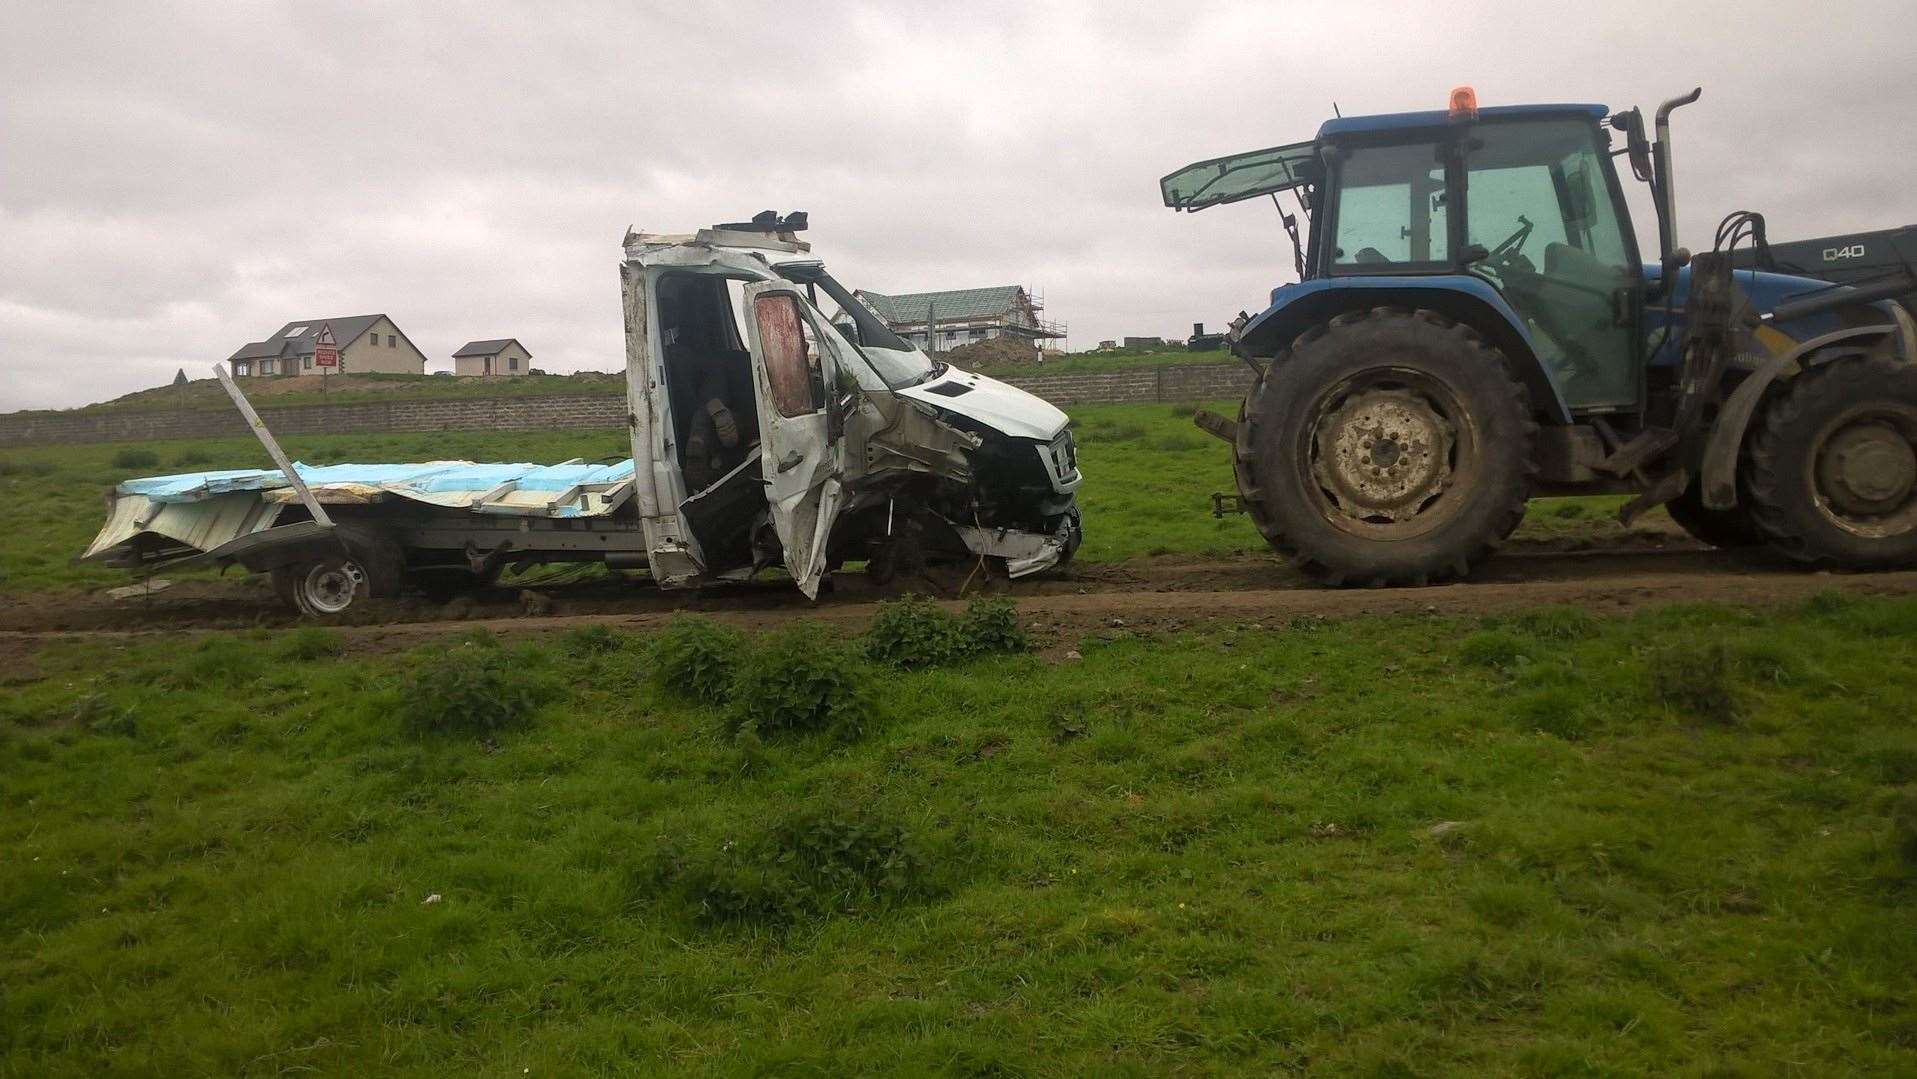 The van being towed up to the main road by a tractor. Pictures courtesy of Jim Macgregor